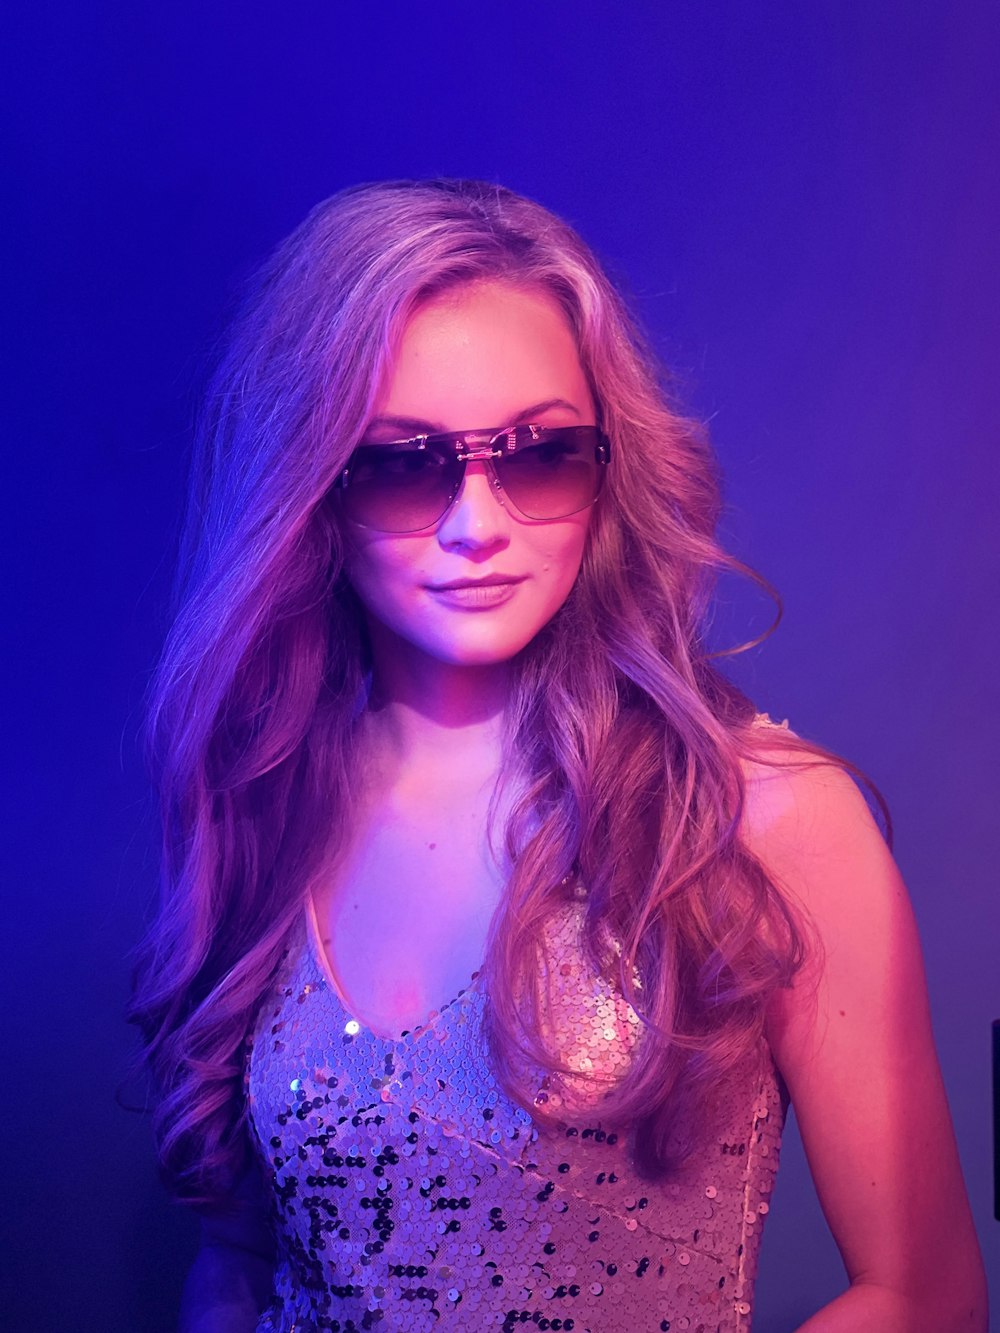 a woman with long hair wearing sunglasses